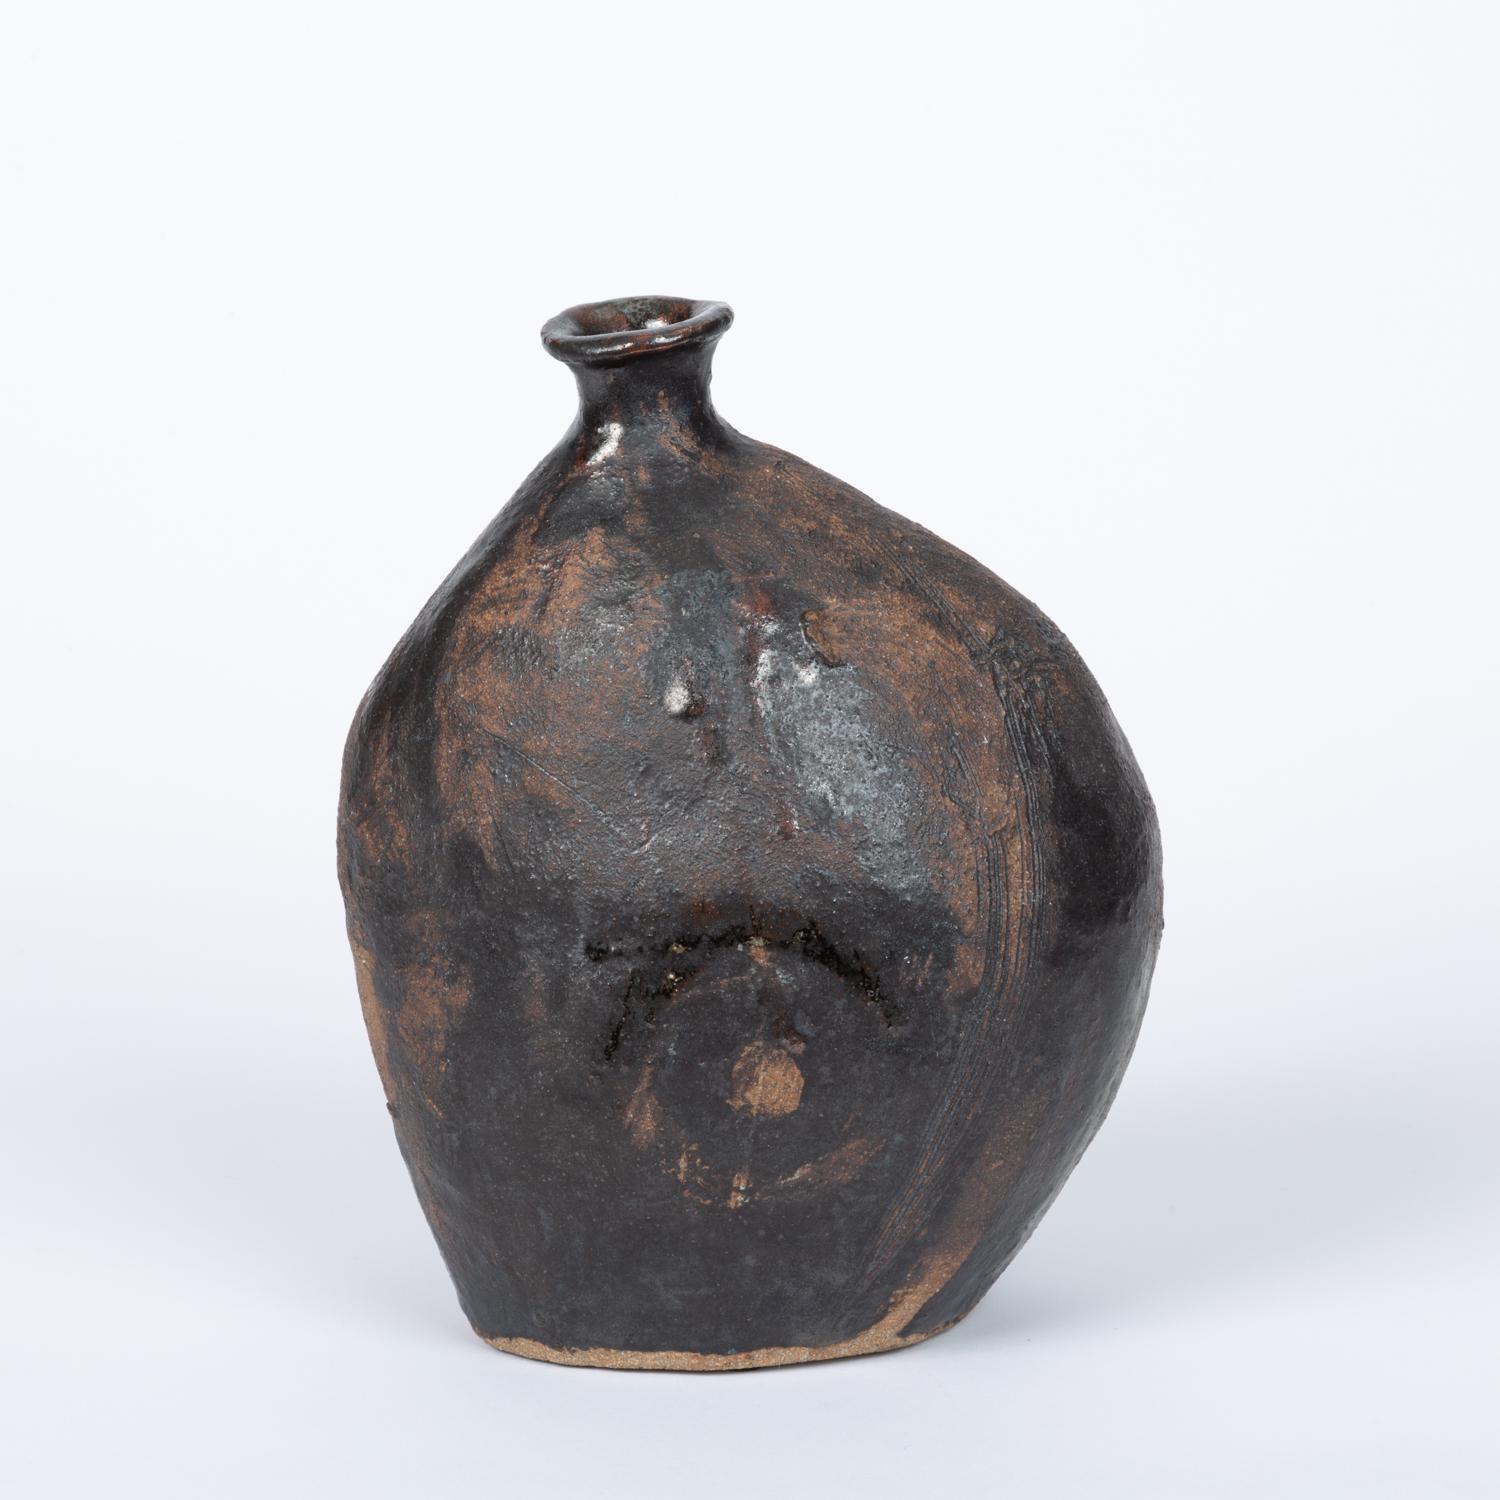 A Studio Pottery ceramic vessel in glazed stoneware. The pieces features an ebony matte glaze lightly applied on the body of the vessel with white glossy glaze accents, while the bottom is left unglazed in the natural stoneware clay. Signed 